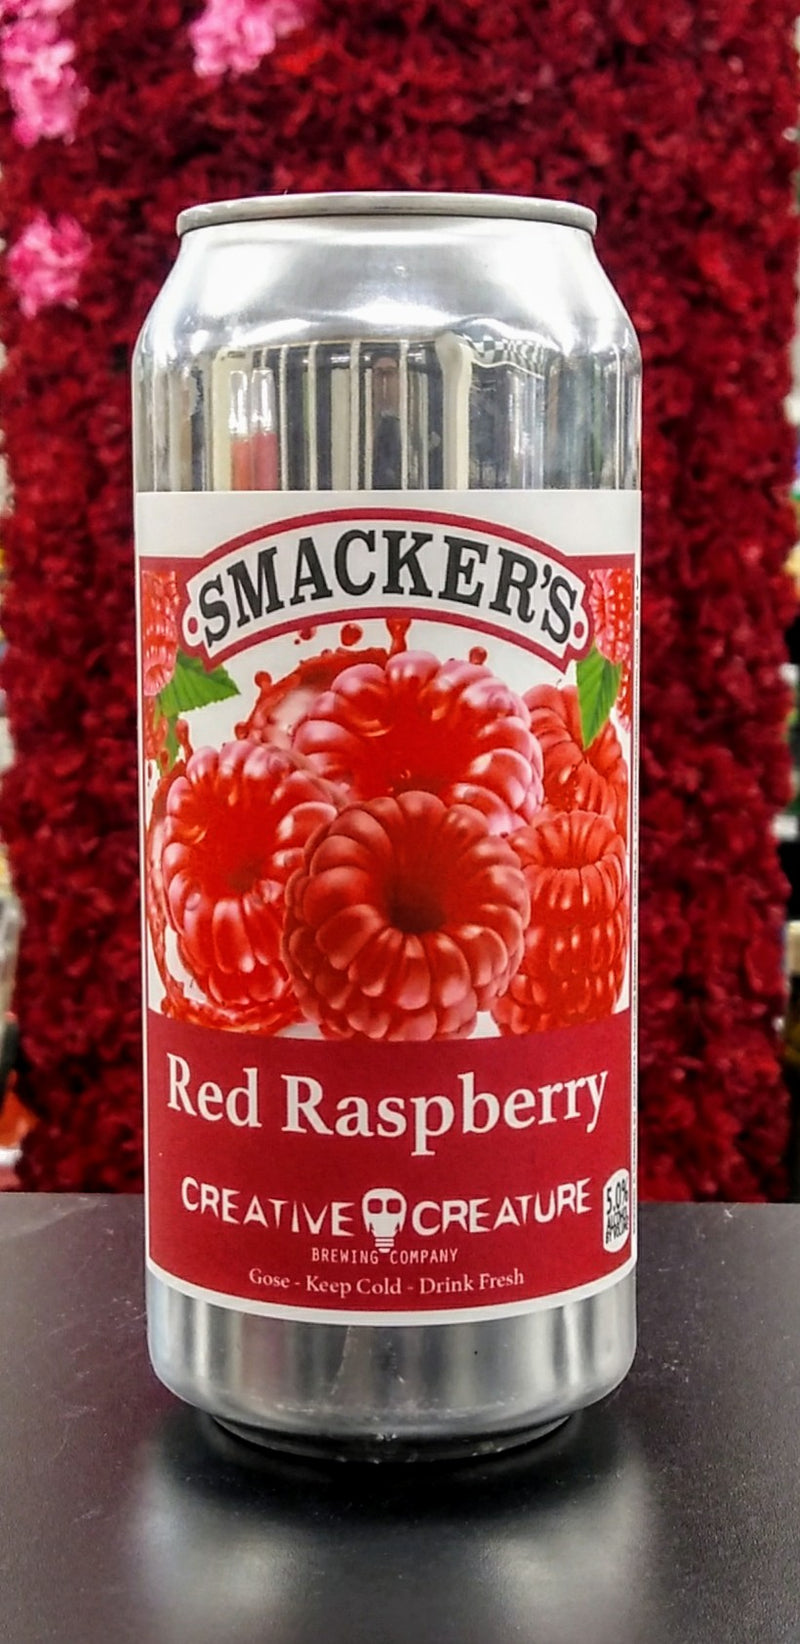 CREATIVE CREATURE BREWING CO. SMACKERS RED RASPBERRY GOSE SOUR ALE 16oz can